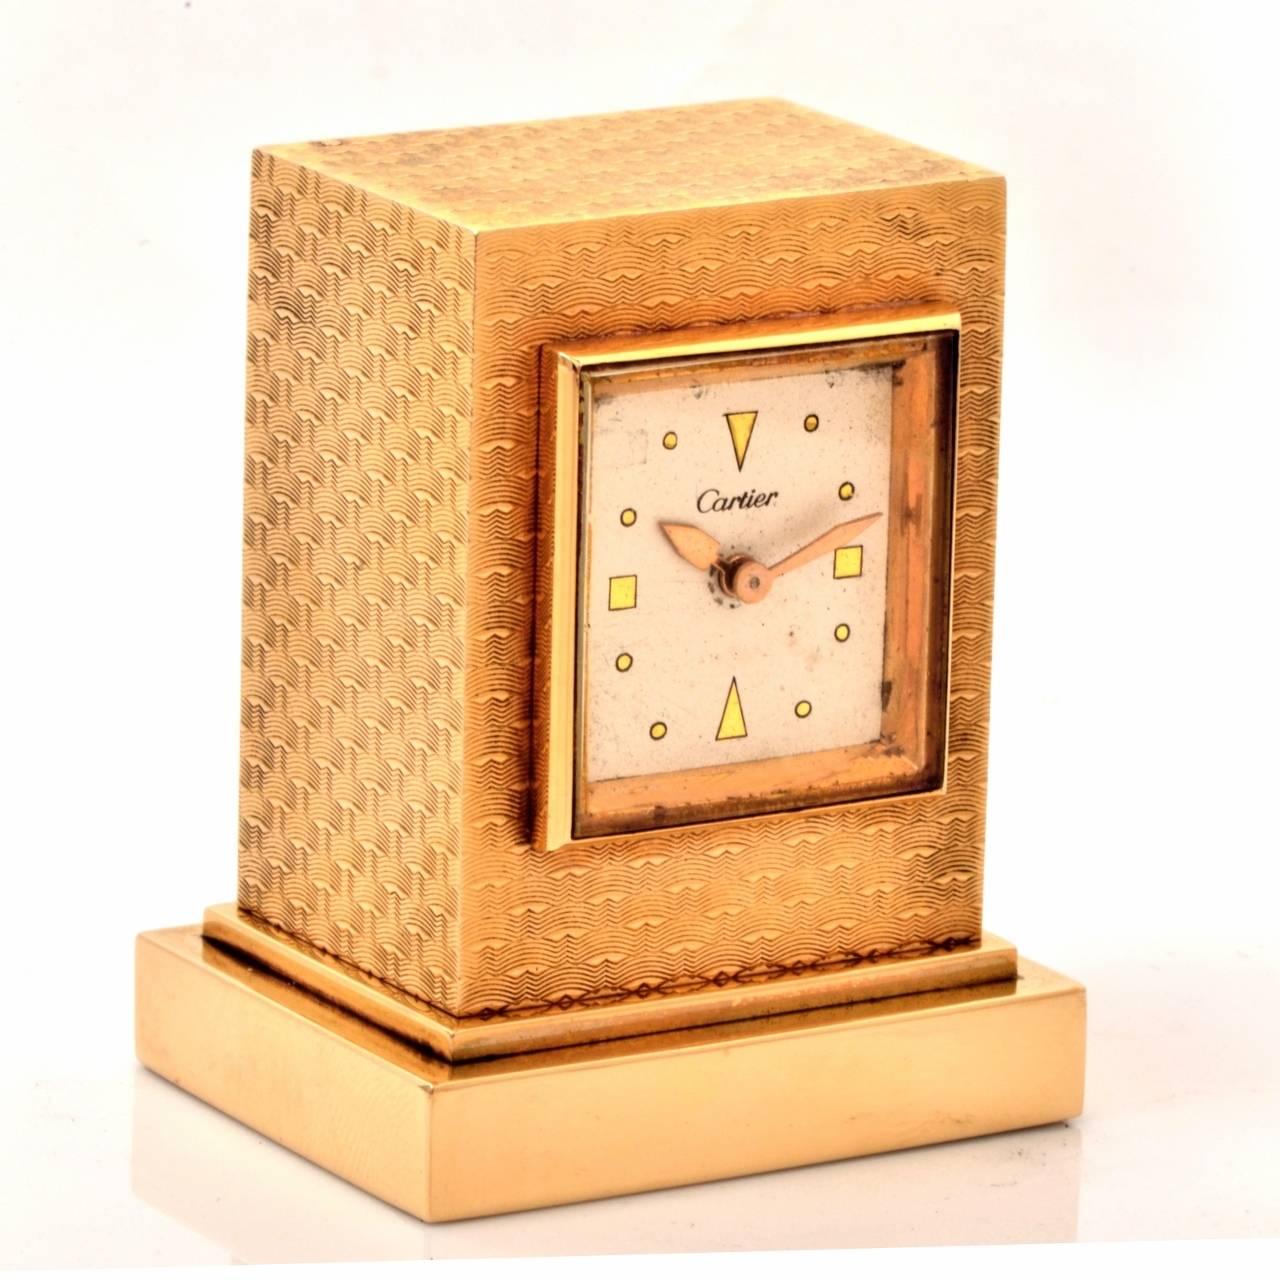 This aesthetically captivating authentic circa 1950 Cartier eight-day desk clock is made with a solid 14K yellow gold case. It is rendered in artfully textured gold, adding a glittering aspect to the case. The white dial features arrow hands and is